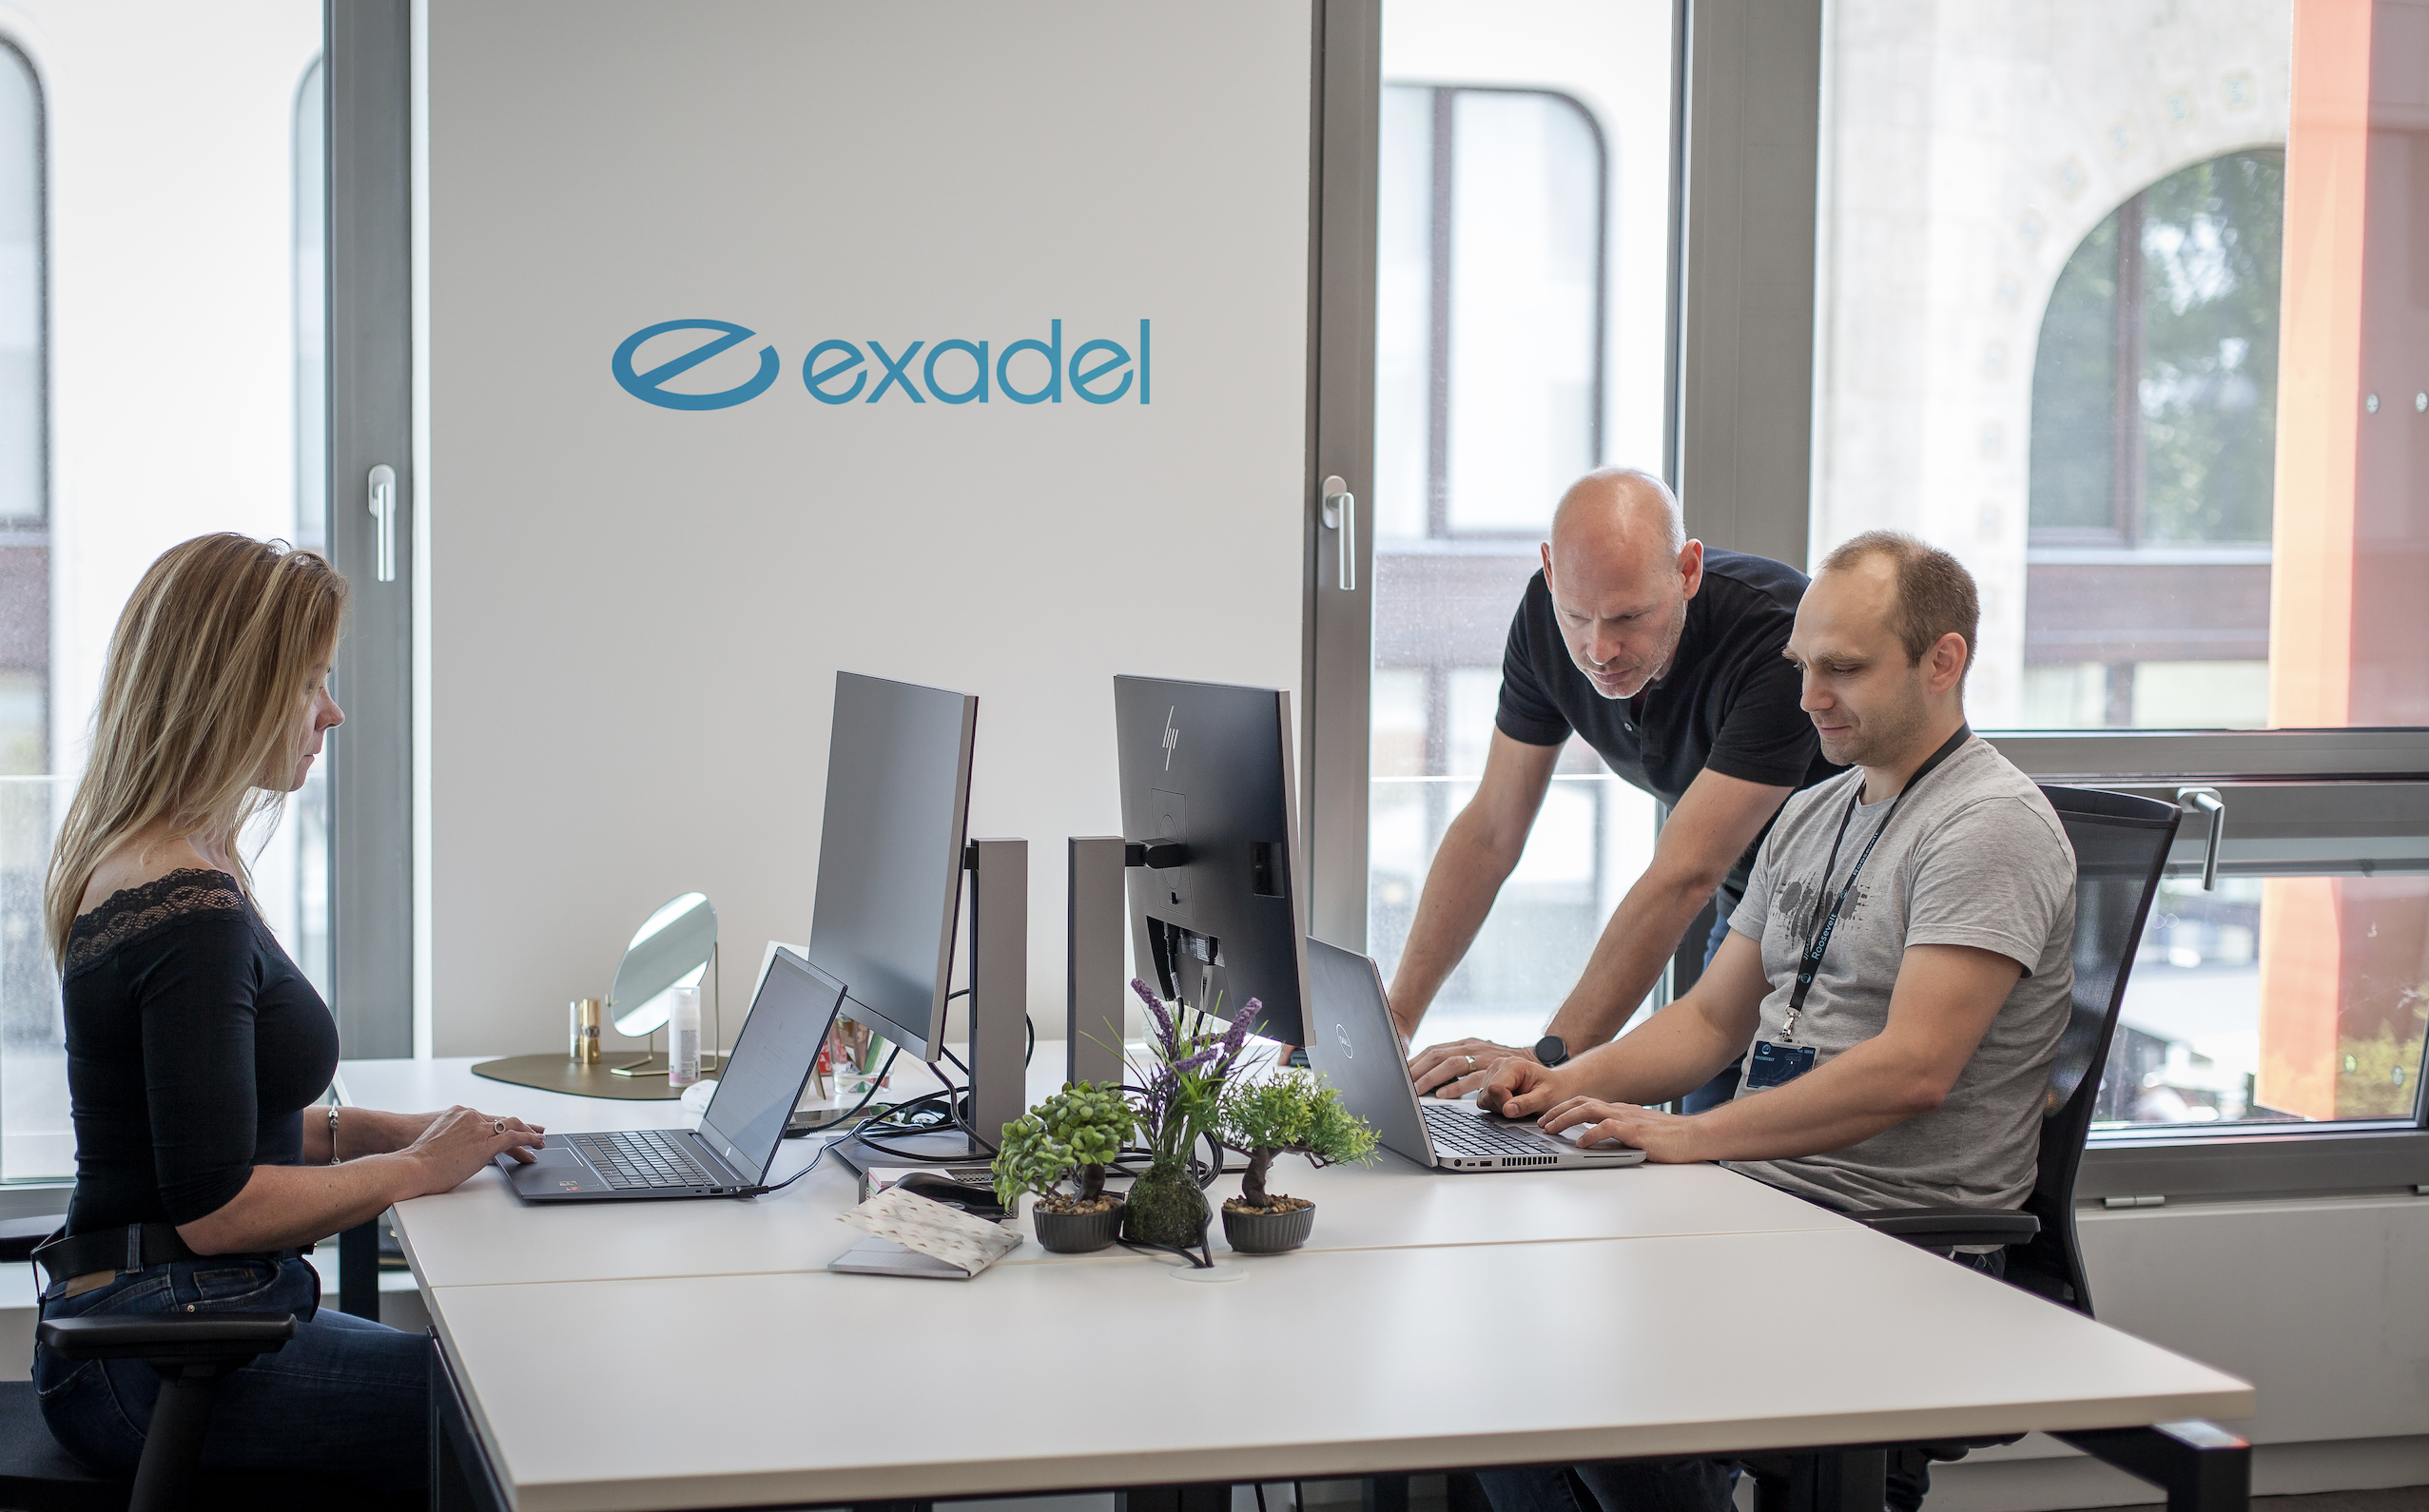 Exadel sets up center of excellence, starts recruitment drive in Hungary